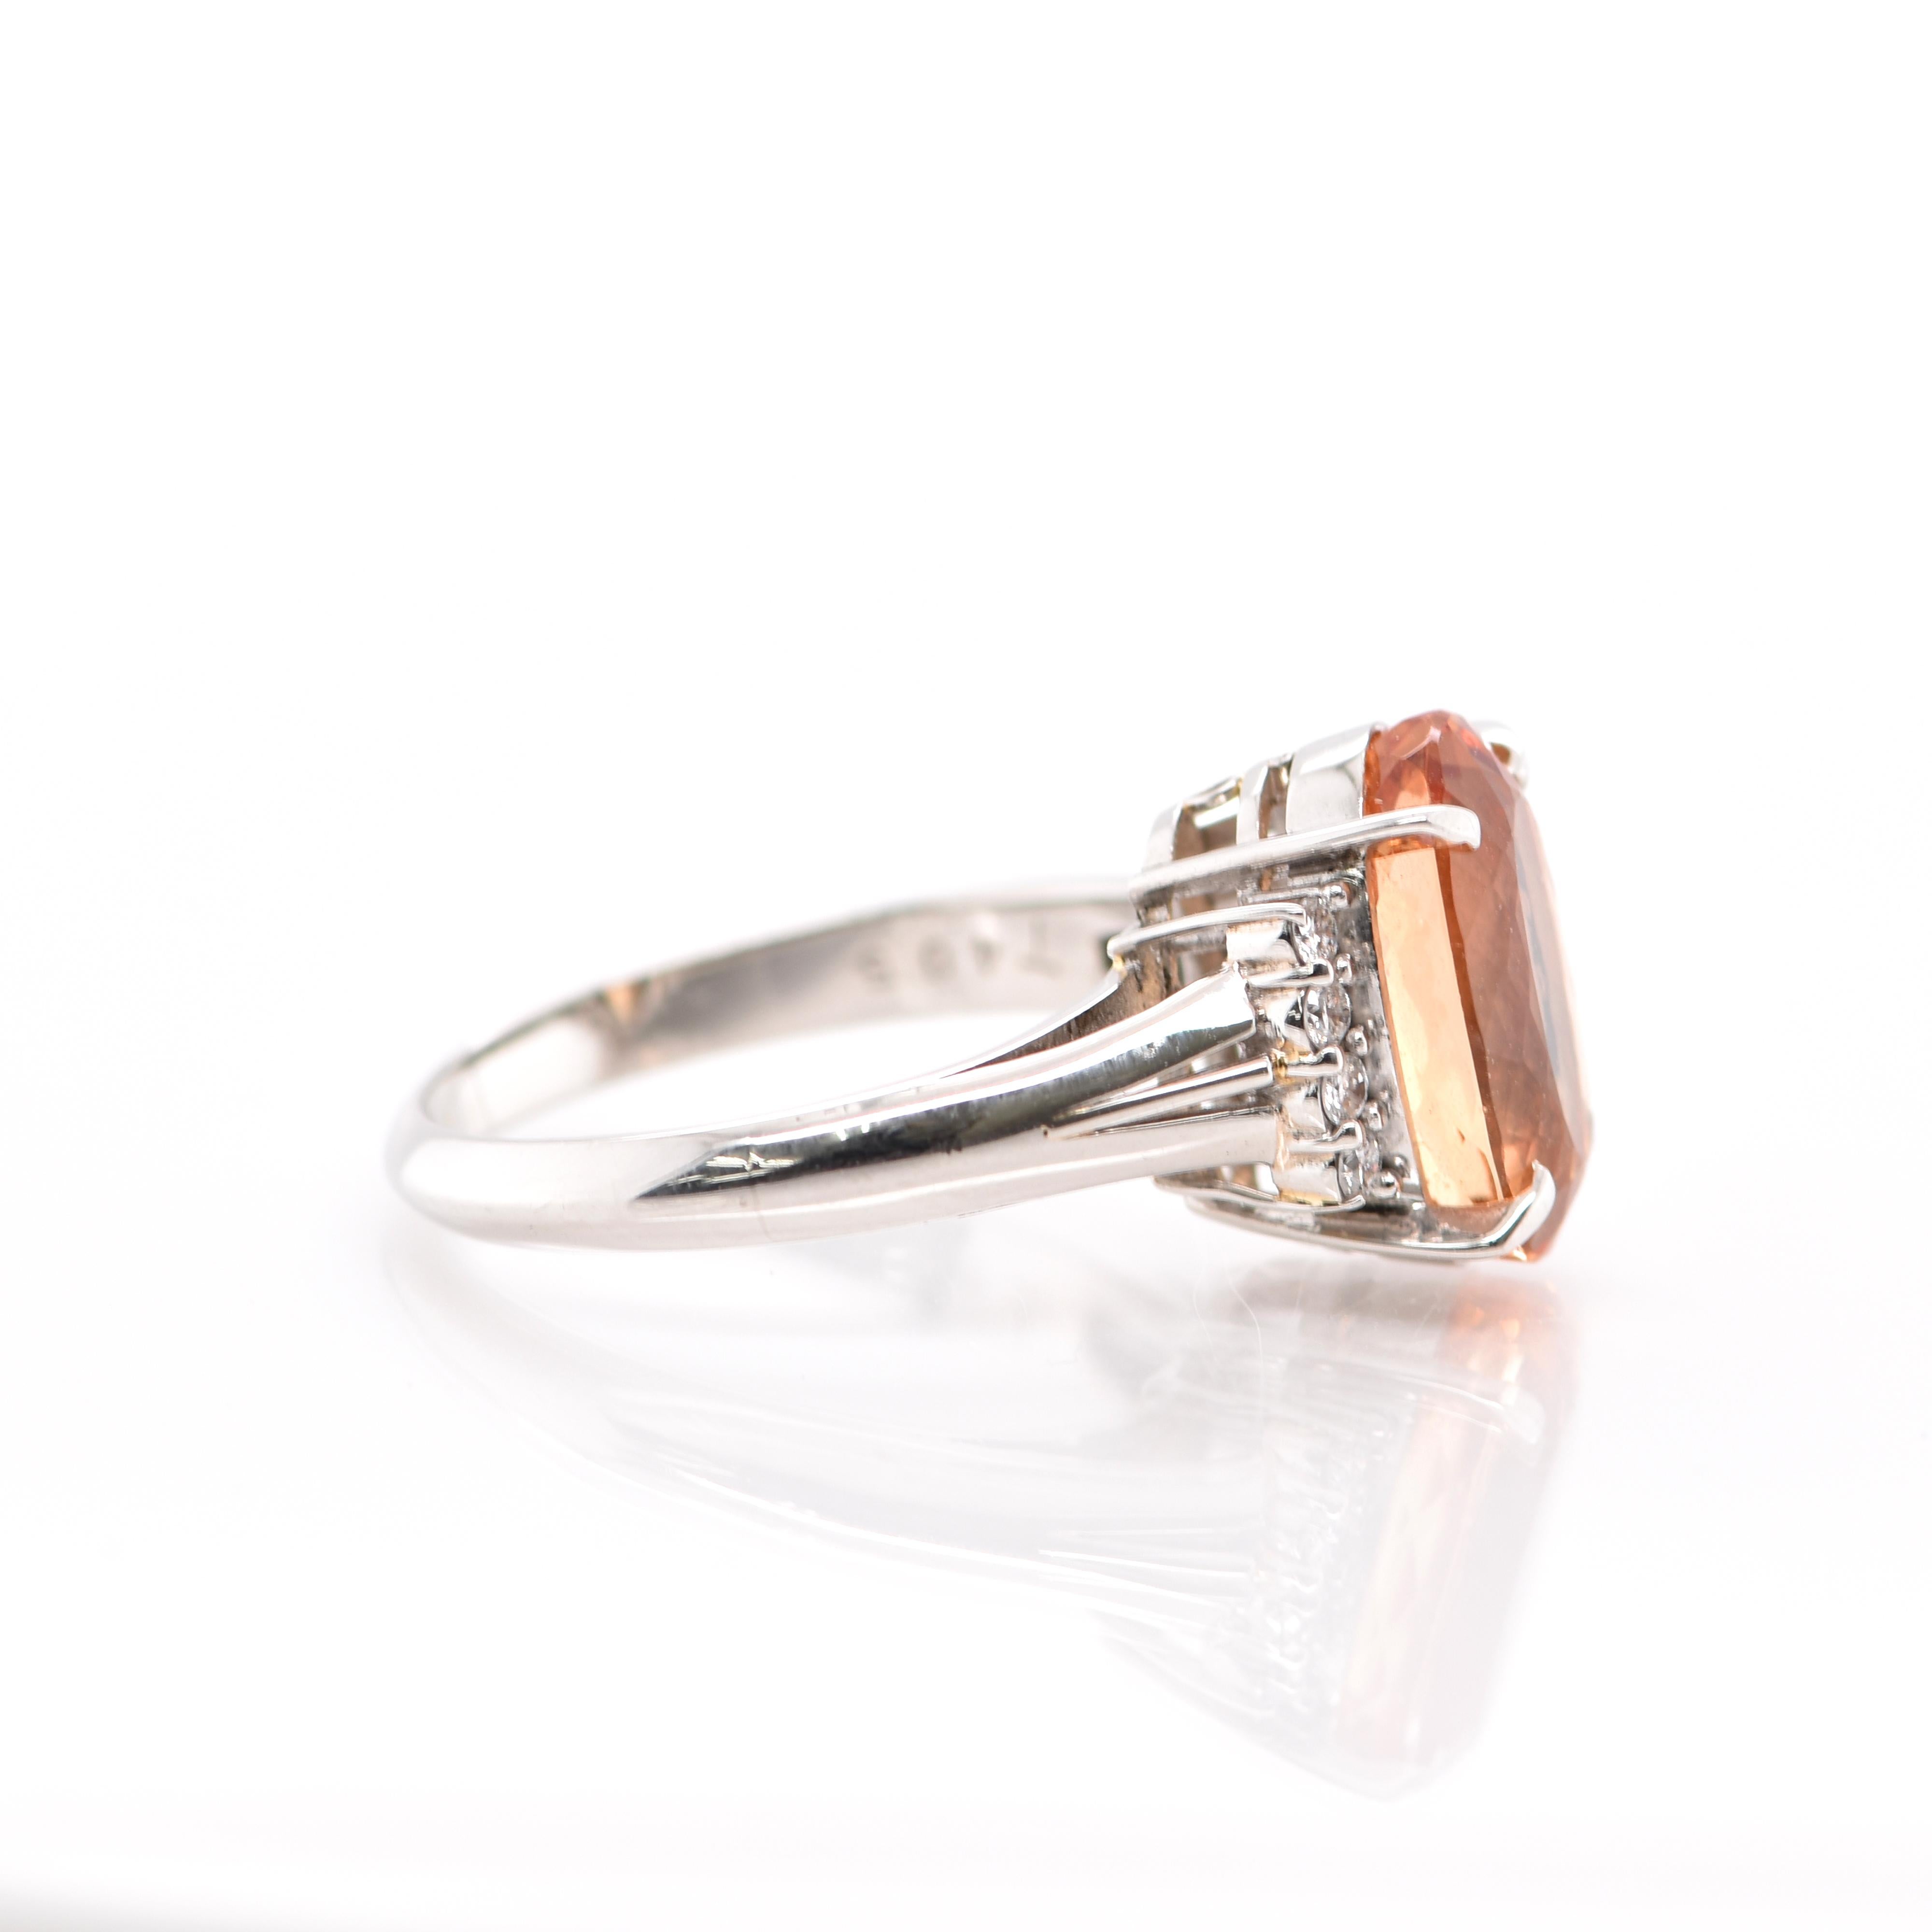 Women's 4.05 Carat Imperial Topaz and Diamond Cocktail Ring Set in Platinum